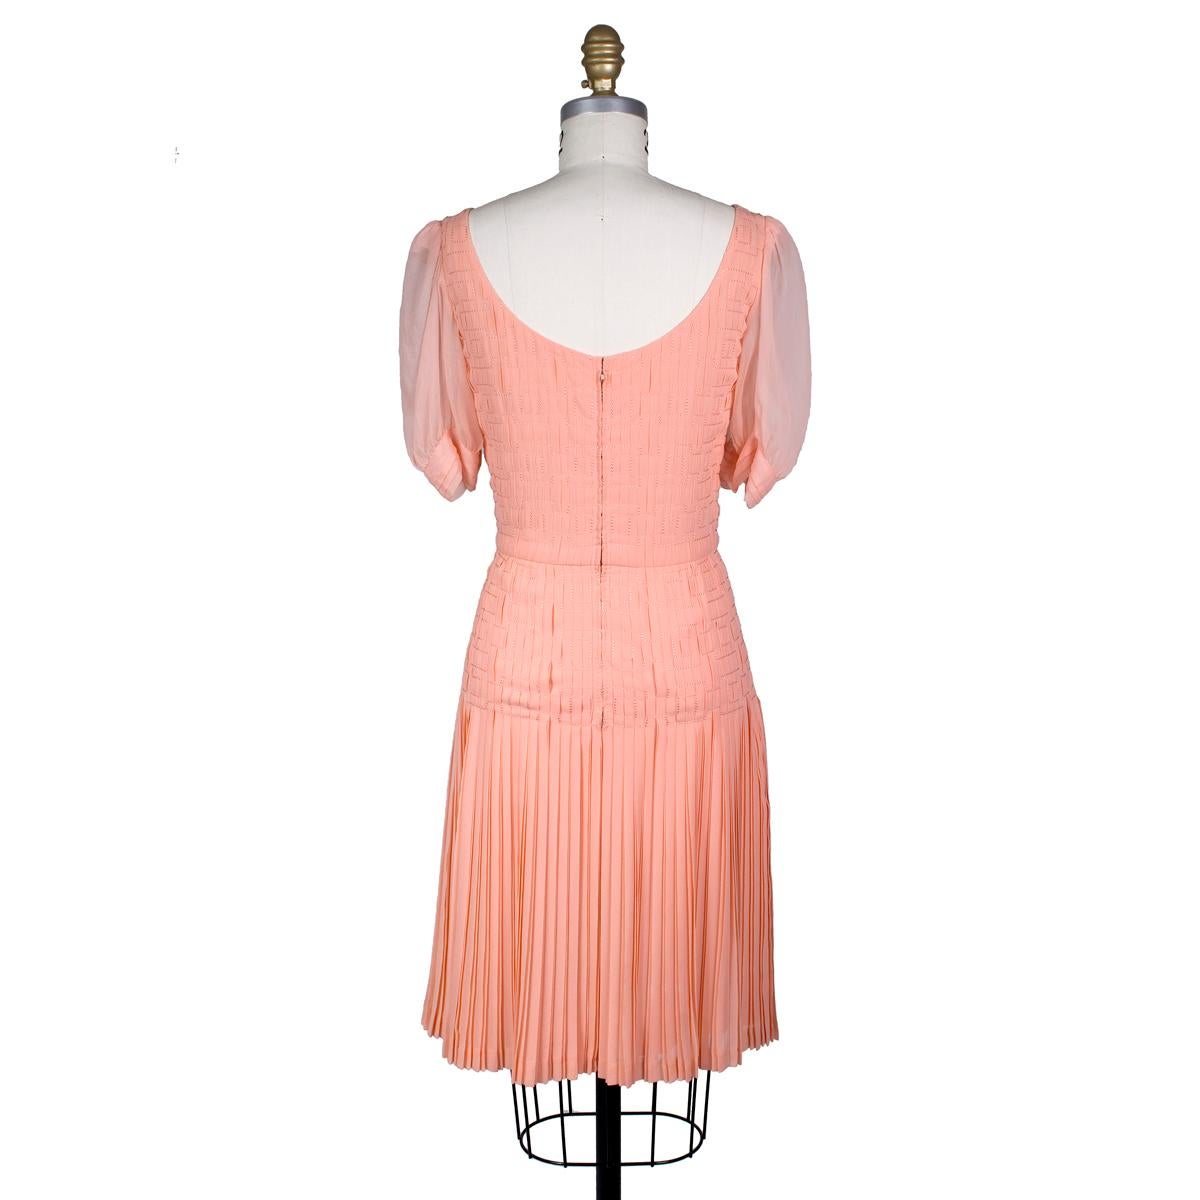 Vintage dress by Coco Chanel
Peach pink silk chiffon with stitching and pleating details 
Sheer puff style sleeves
Condition: Excellent vintage condition

Size/Measurements:
32